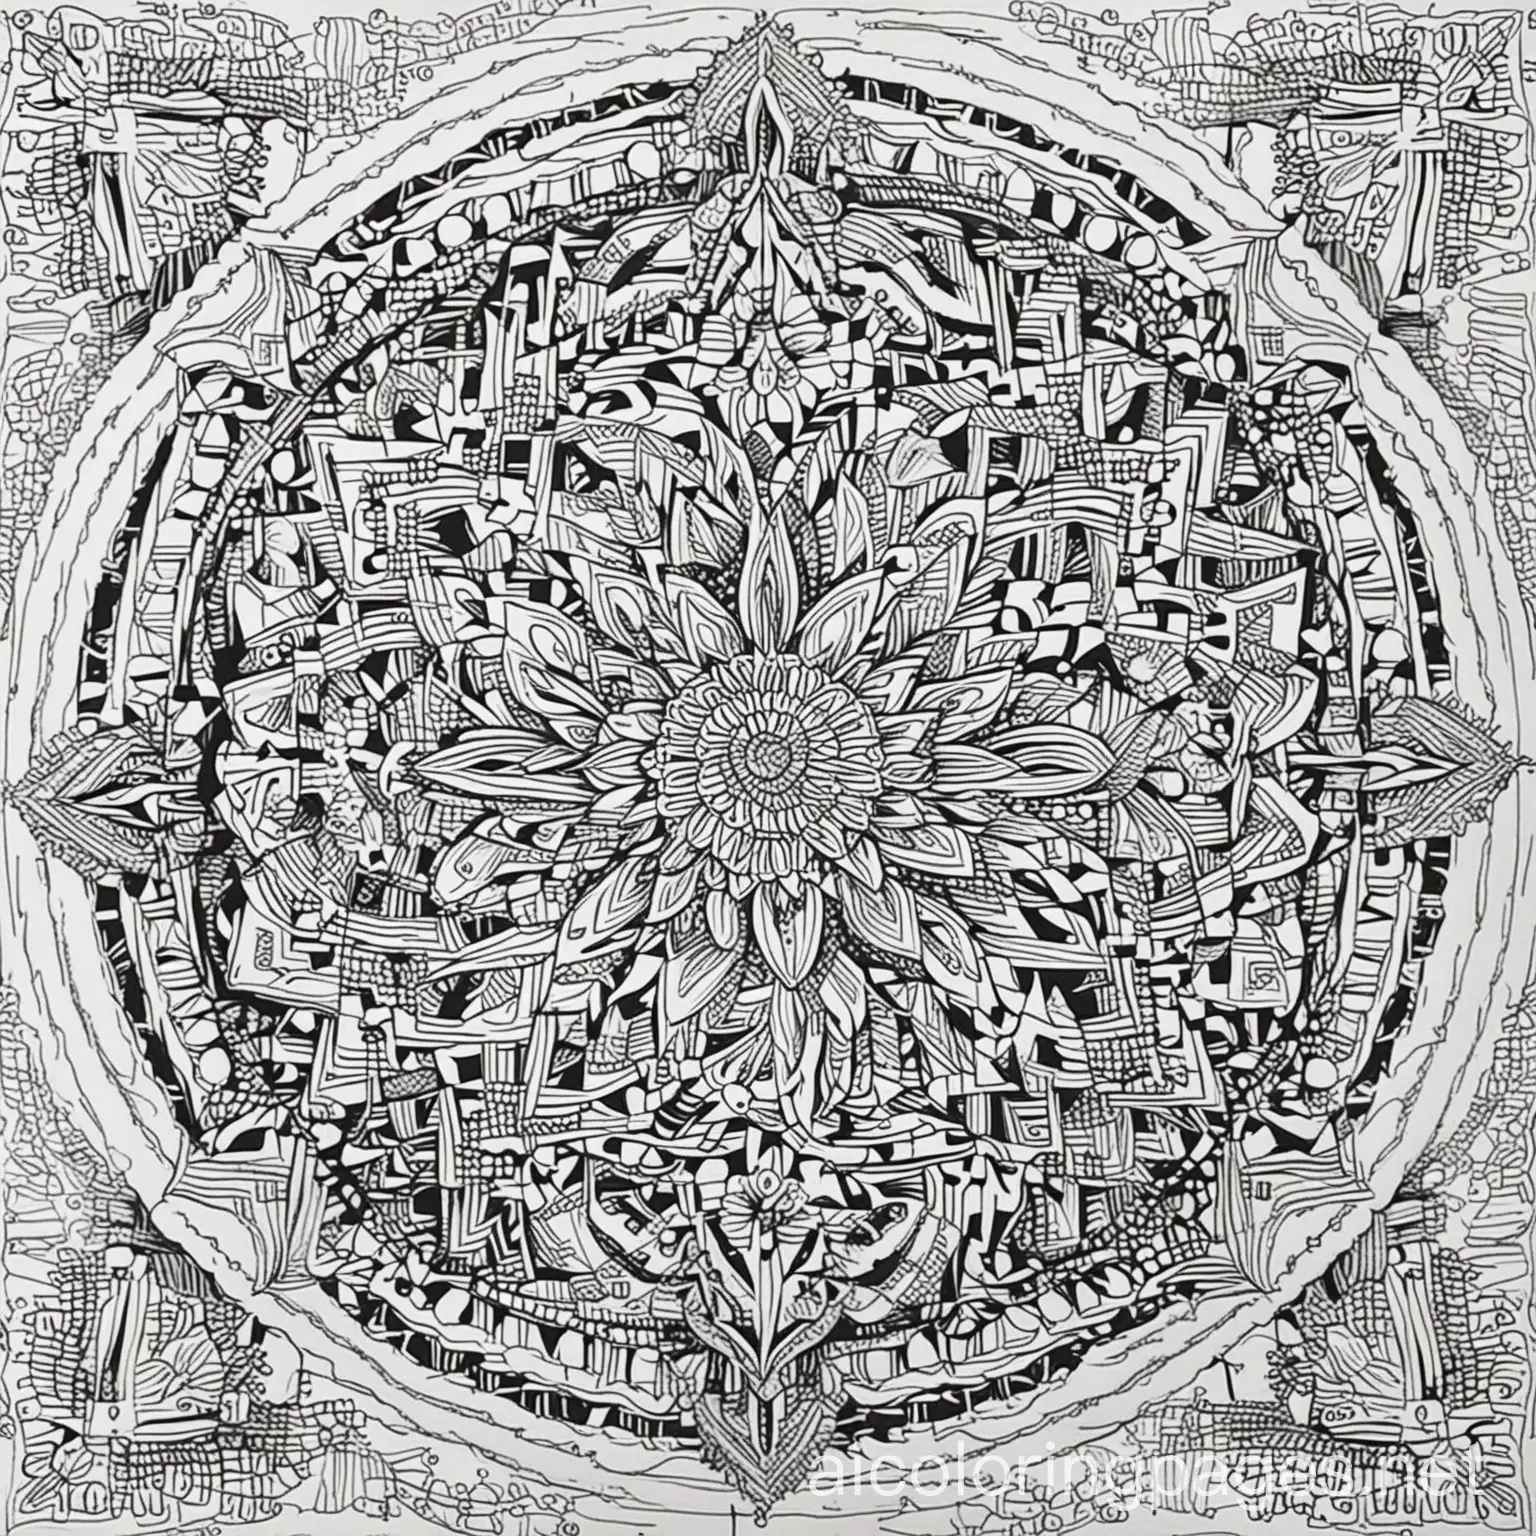 Design a complex and intricate mandala pattern with various geometric shapes and floral elements, Coloring Page, black and white, line art, white background, Simplicity, Ample White Space. The background of the coloring page is plain white to make it easy for young children to color within the lines. The outlines of all the subjects are easy to distinguish, making it simple for kids to color without too much difficulty